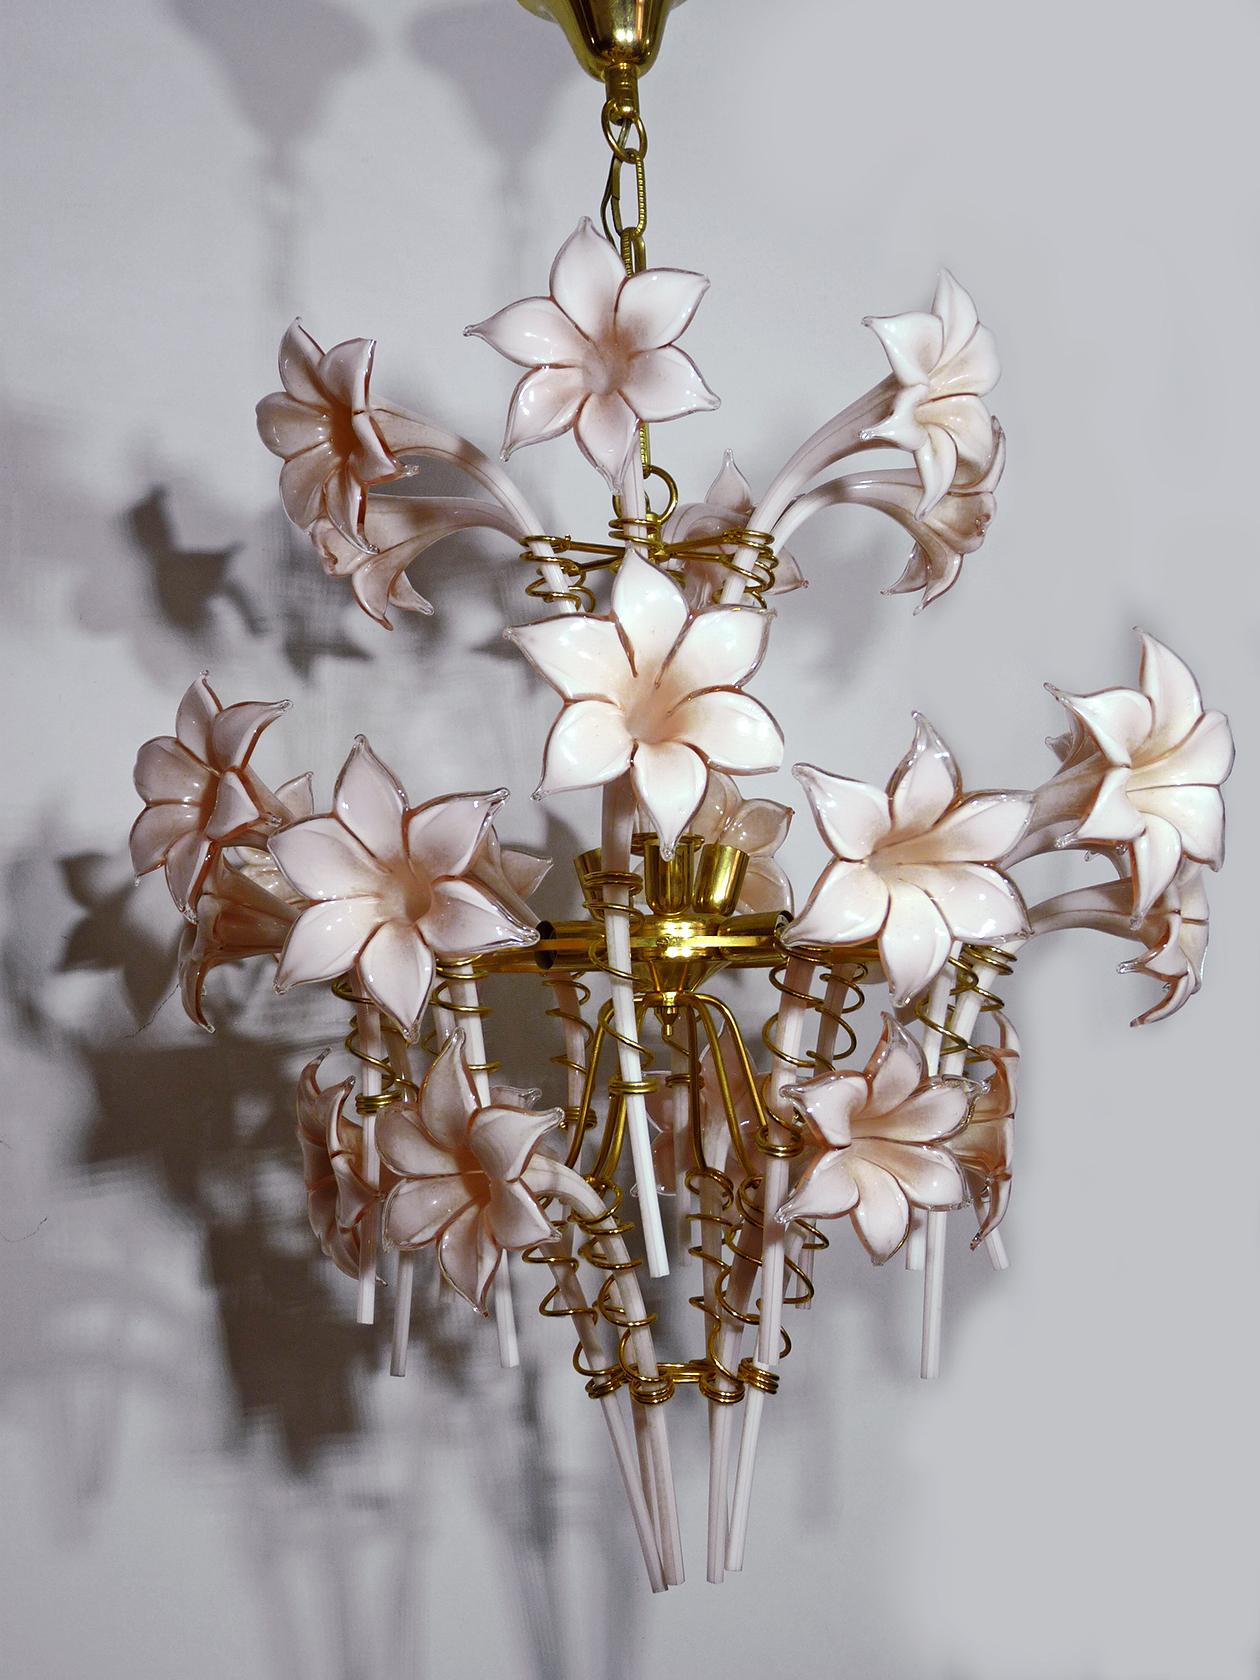 Awesome large 1970s vintage Murano glass Floral Franco Luce Seguso gilt chandelier. Having a gold-plated brass frame, it's spherical center holds twenty-four hand blown blooms in the form of lilies.

Measures:
Diameter 23.6 in/ 60 cm
Height 37.4